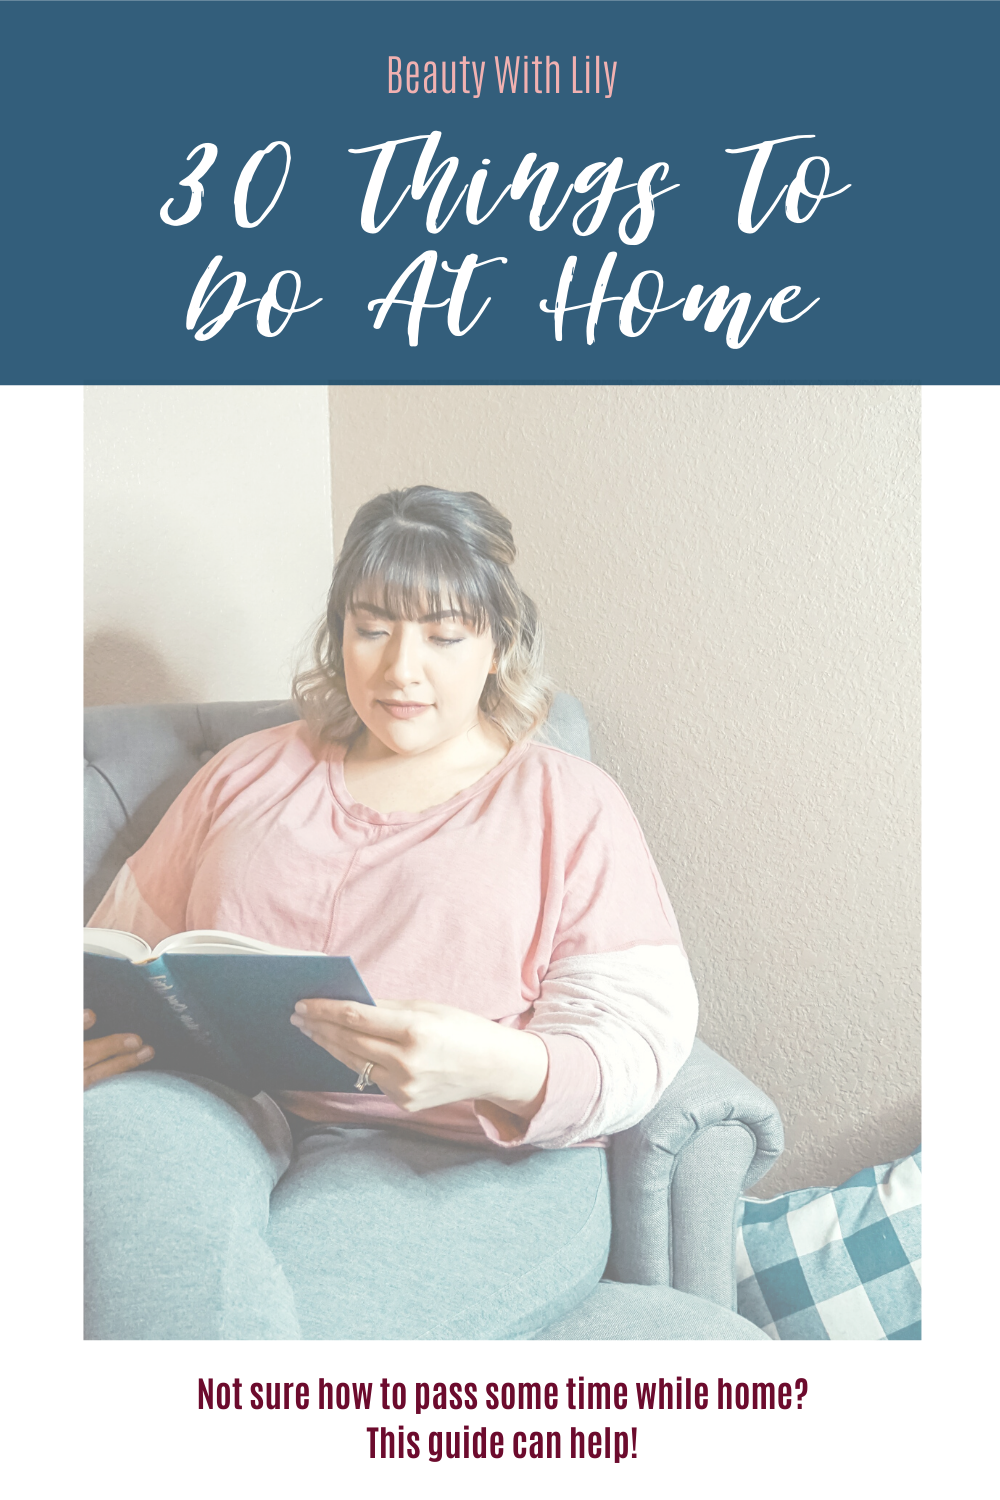 Things To Do At Home // Self-Care Ideas To Do At Home // What To Do When You're Bored // How To Stay Busy // Activities To Do At Home // How To Avoid Being Bored | Beauty With Lily #selfcare 